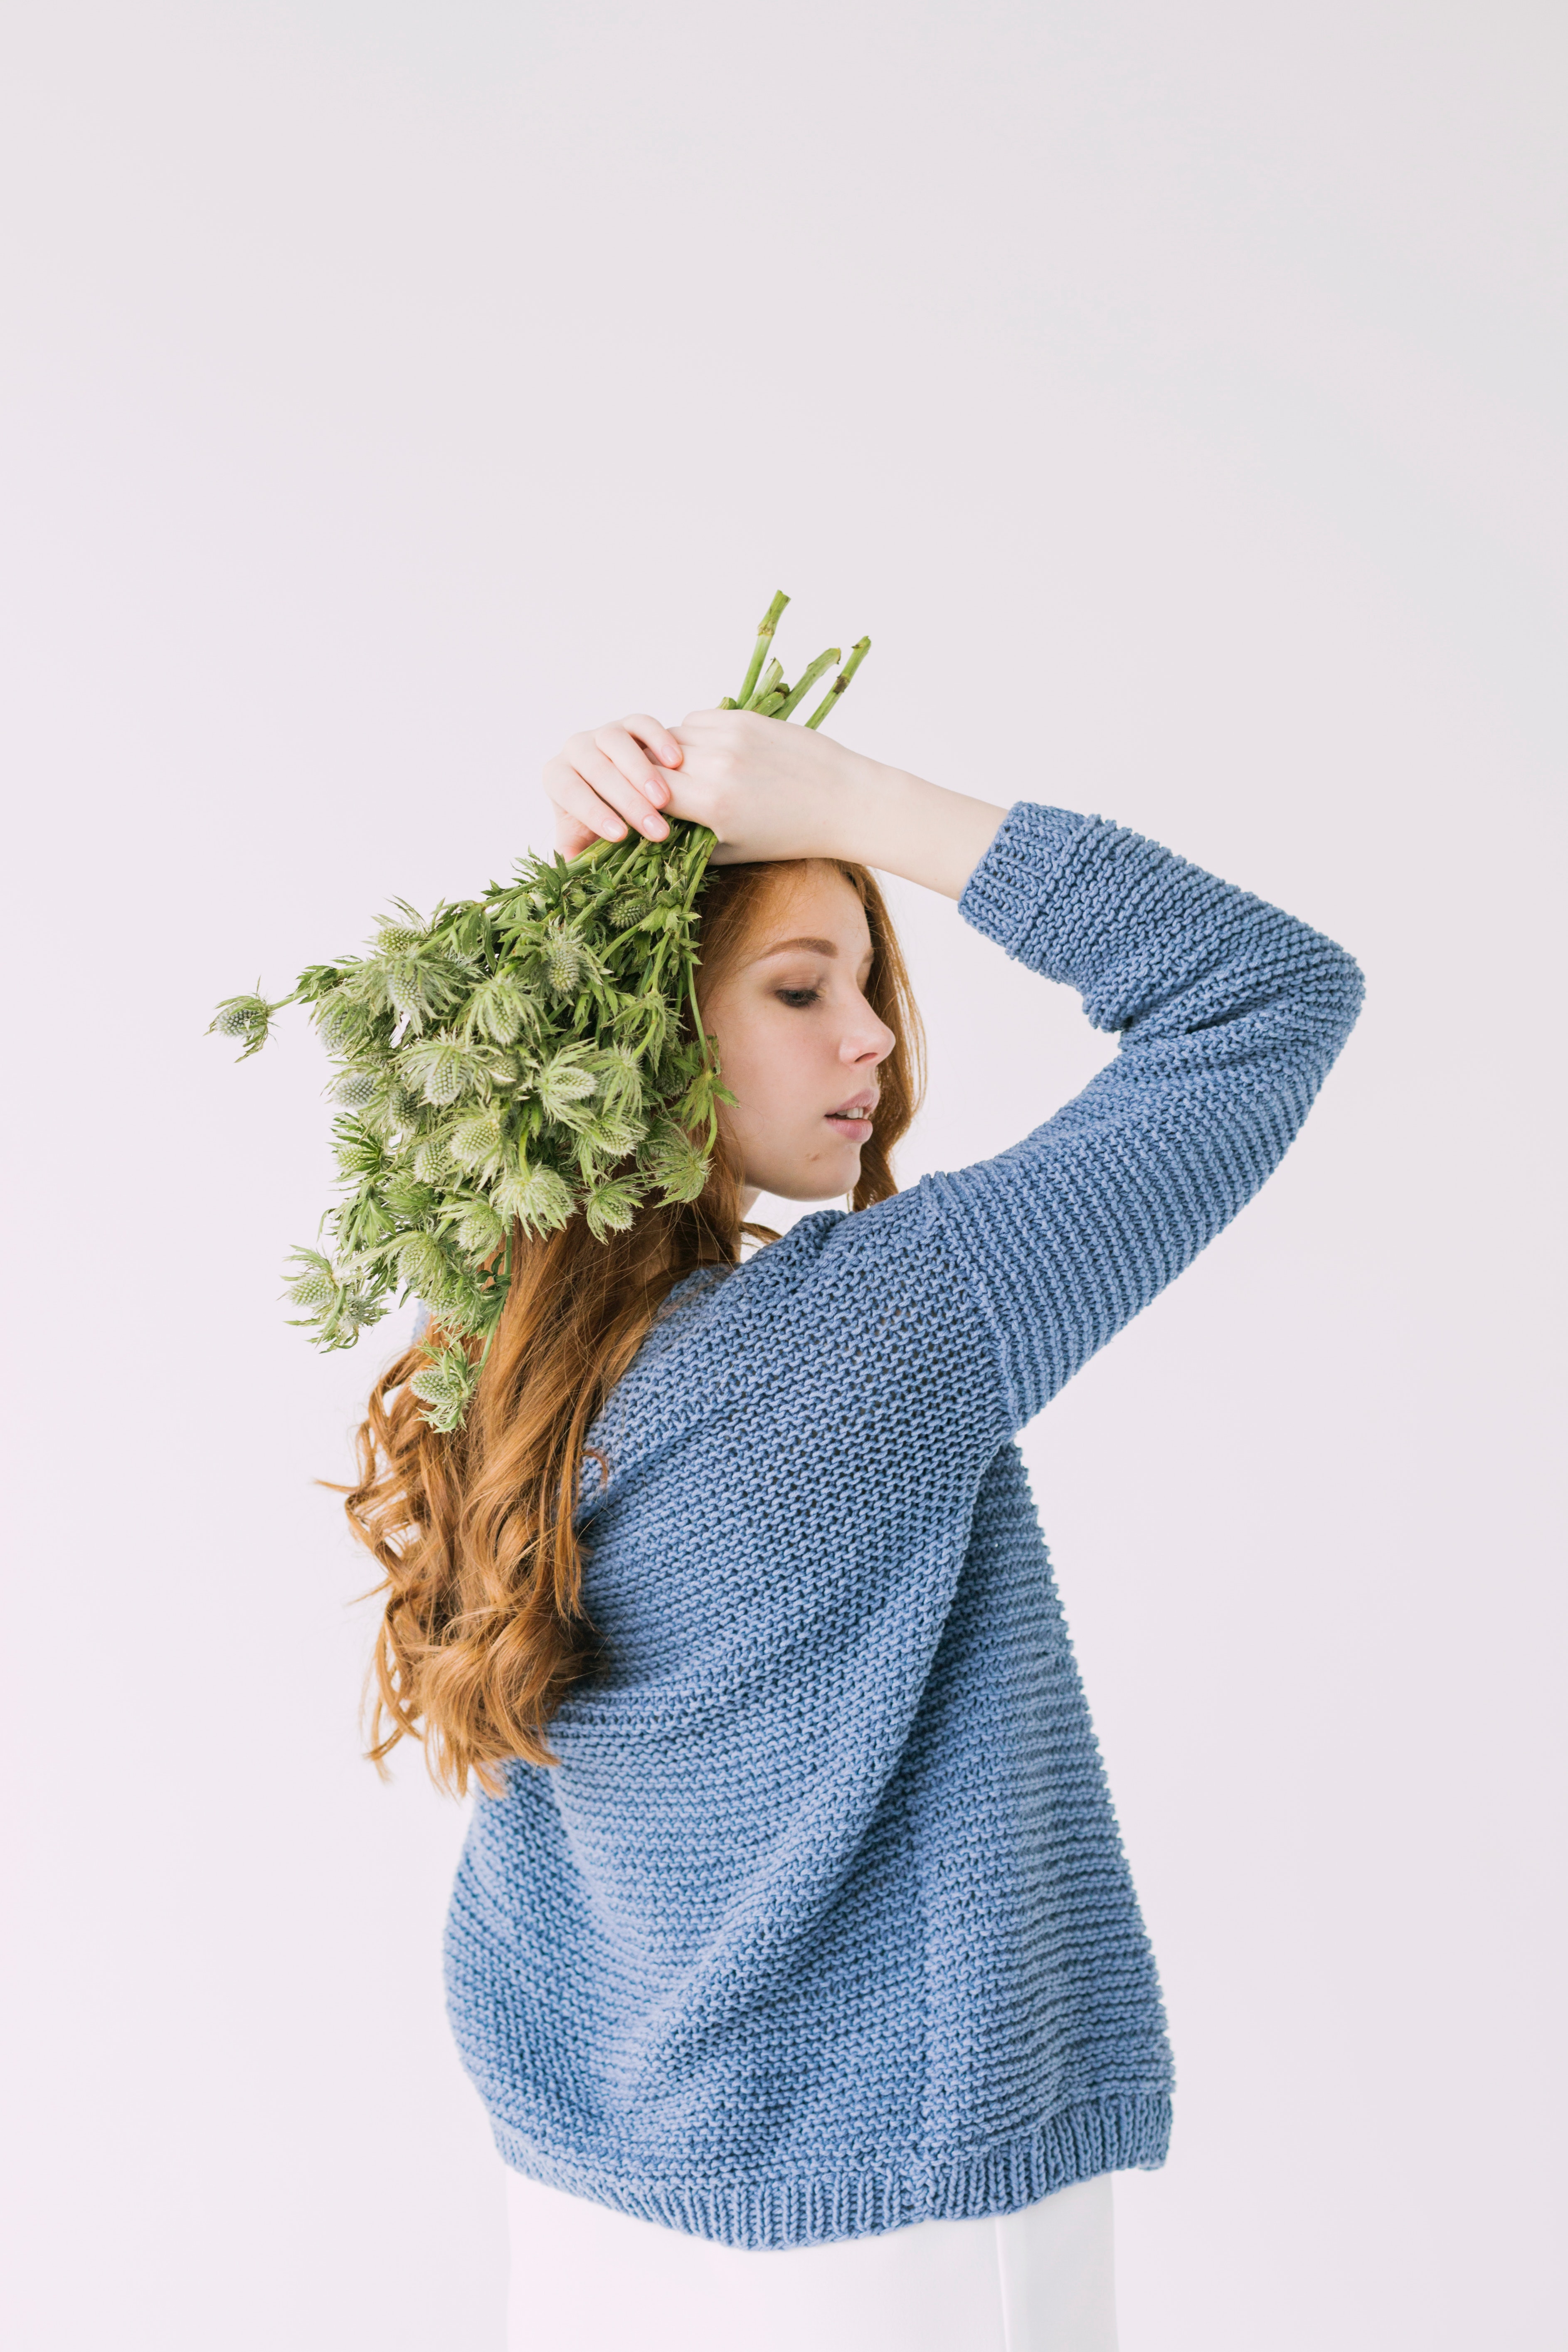 Woman in blue knit cable sweater holding green petaled flowers photo